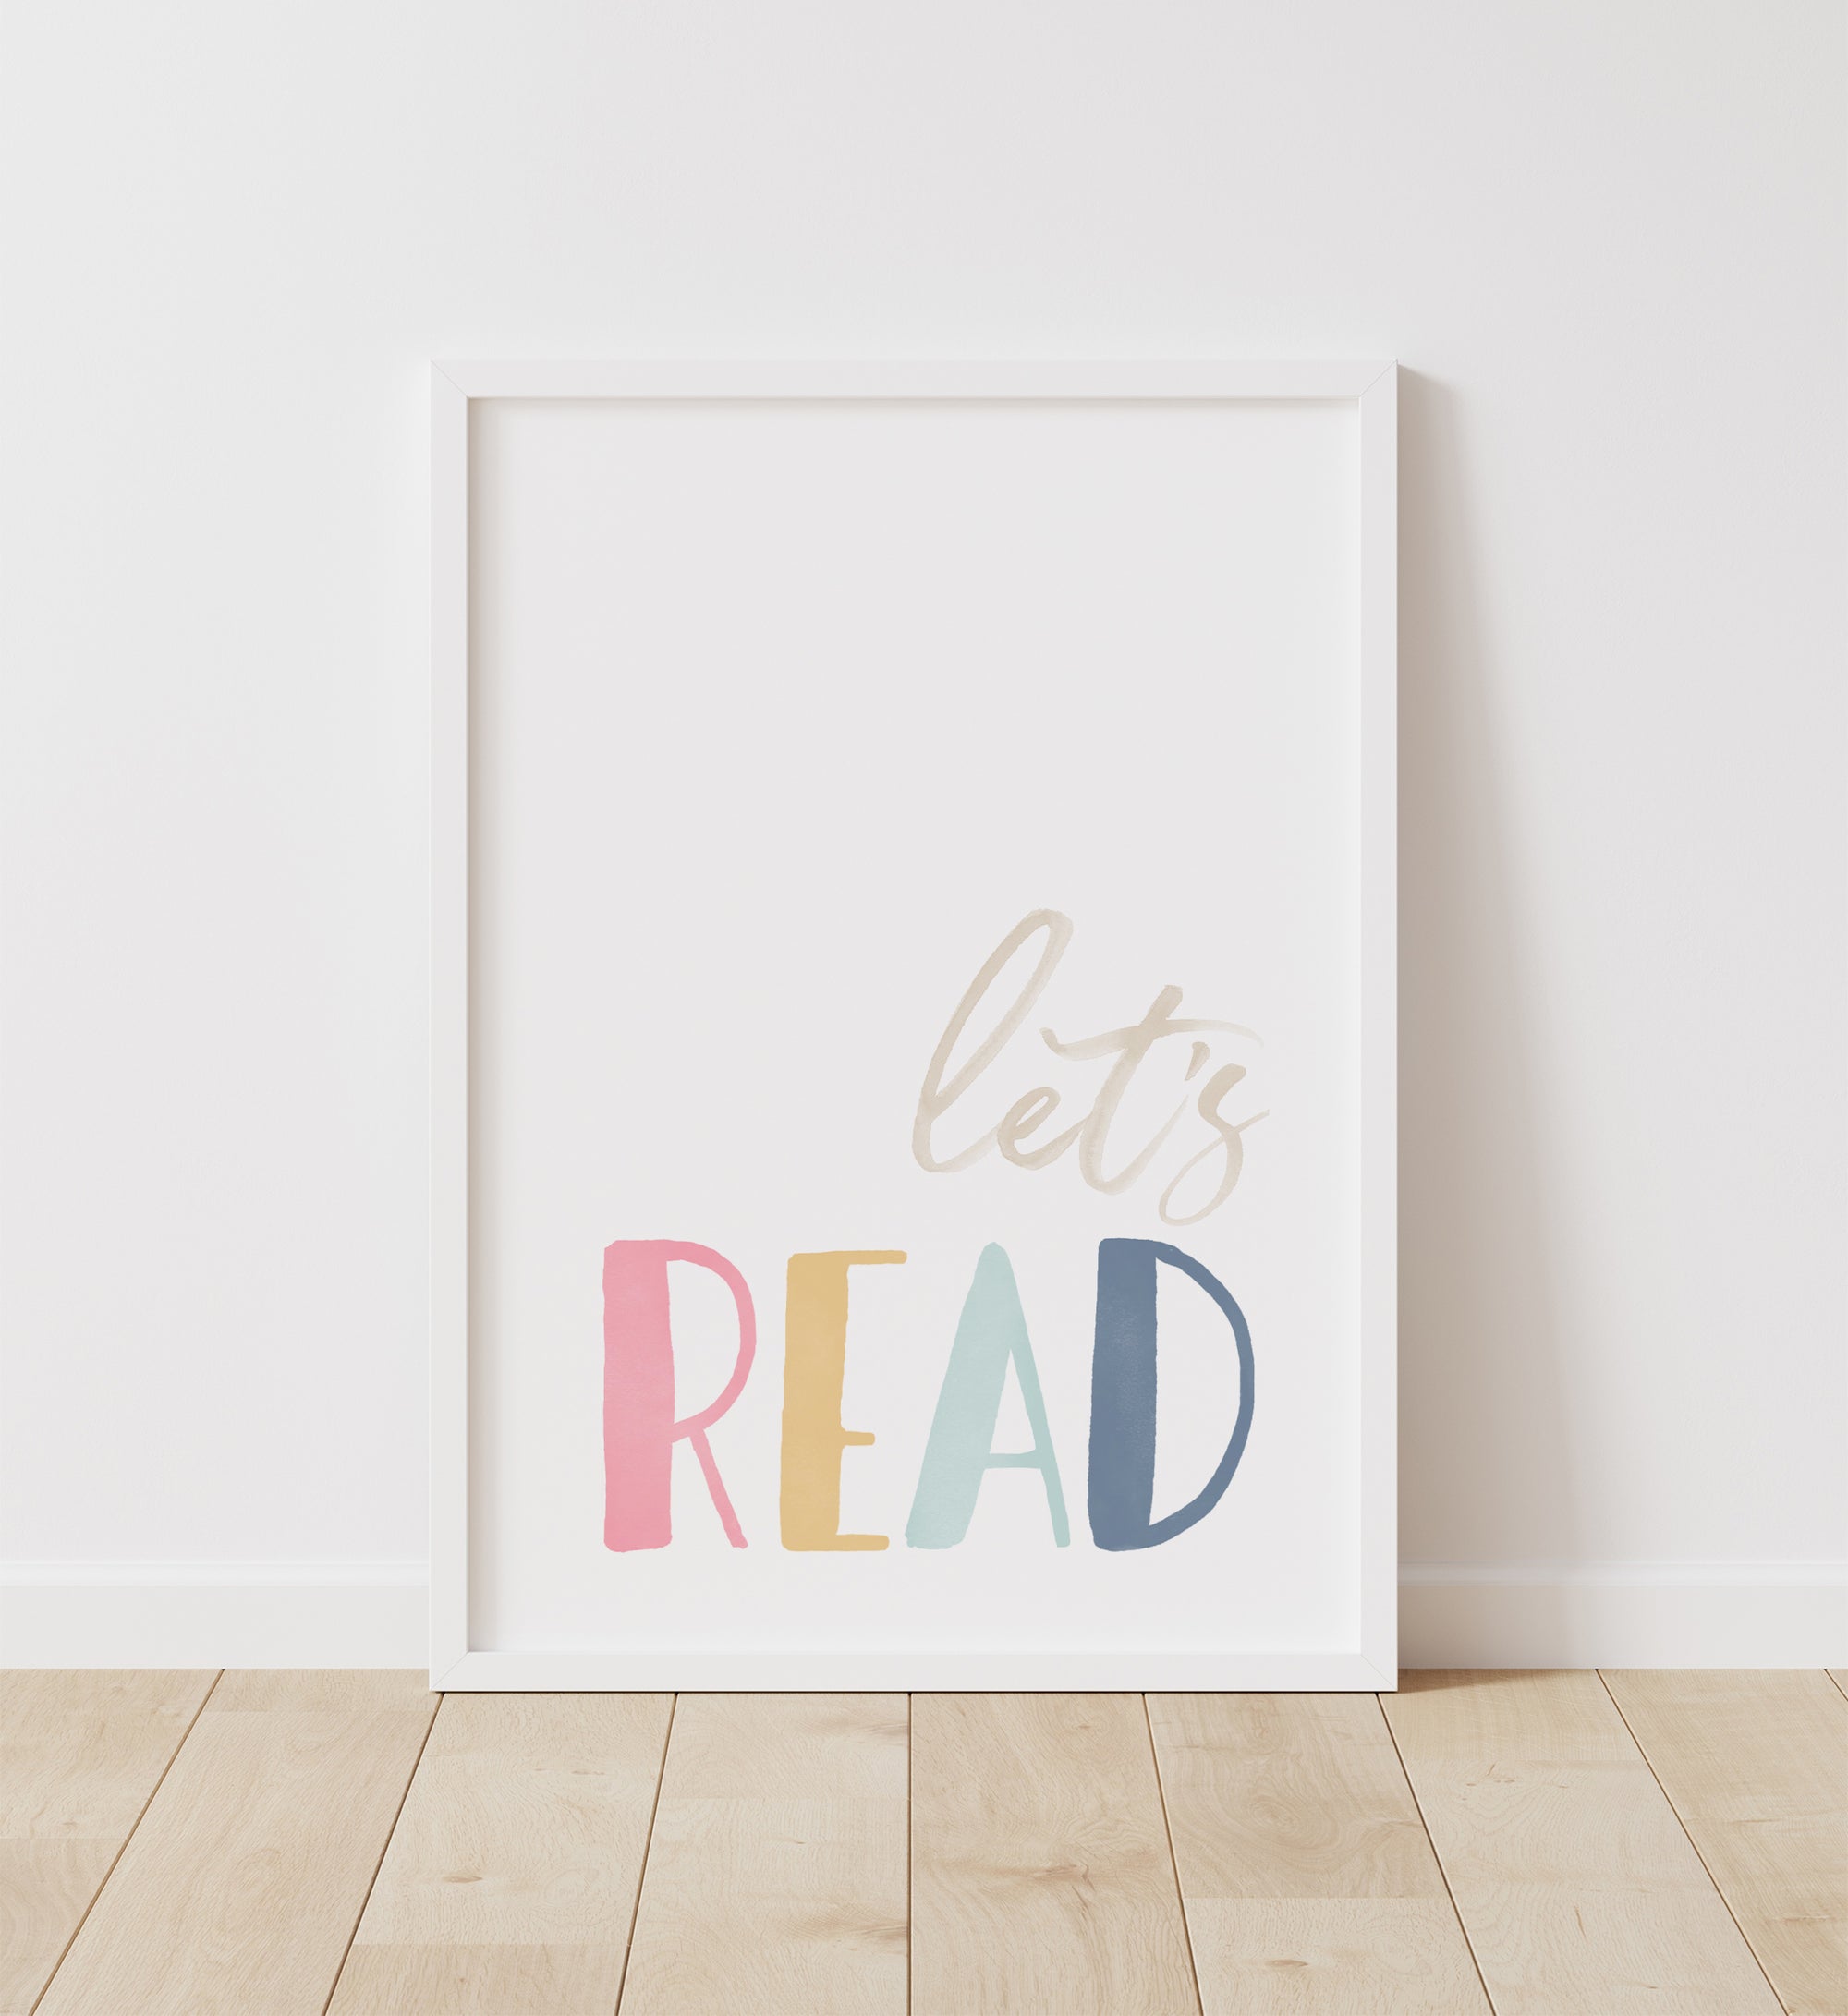 Let's Read Print - SDCP